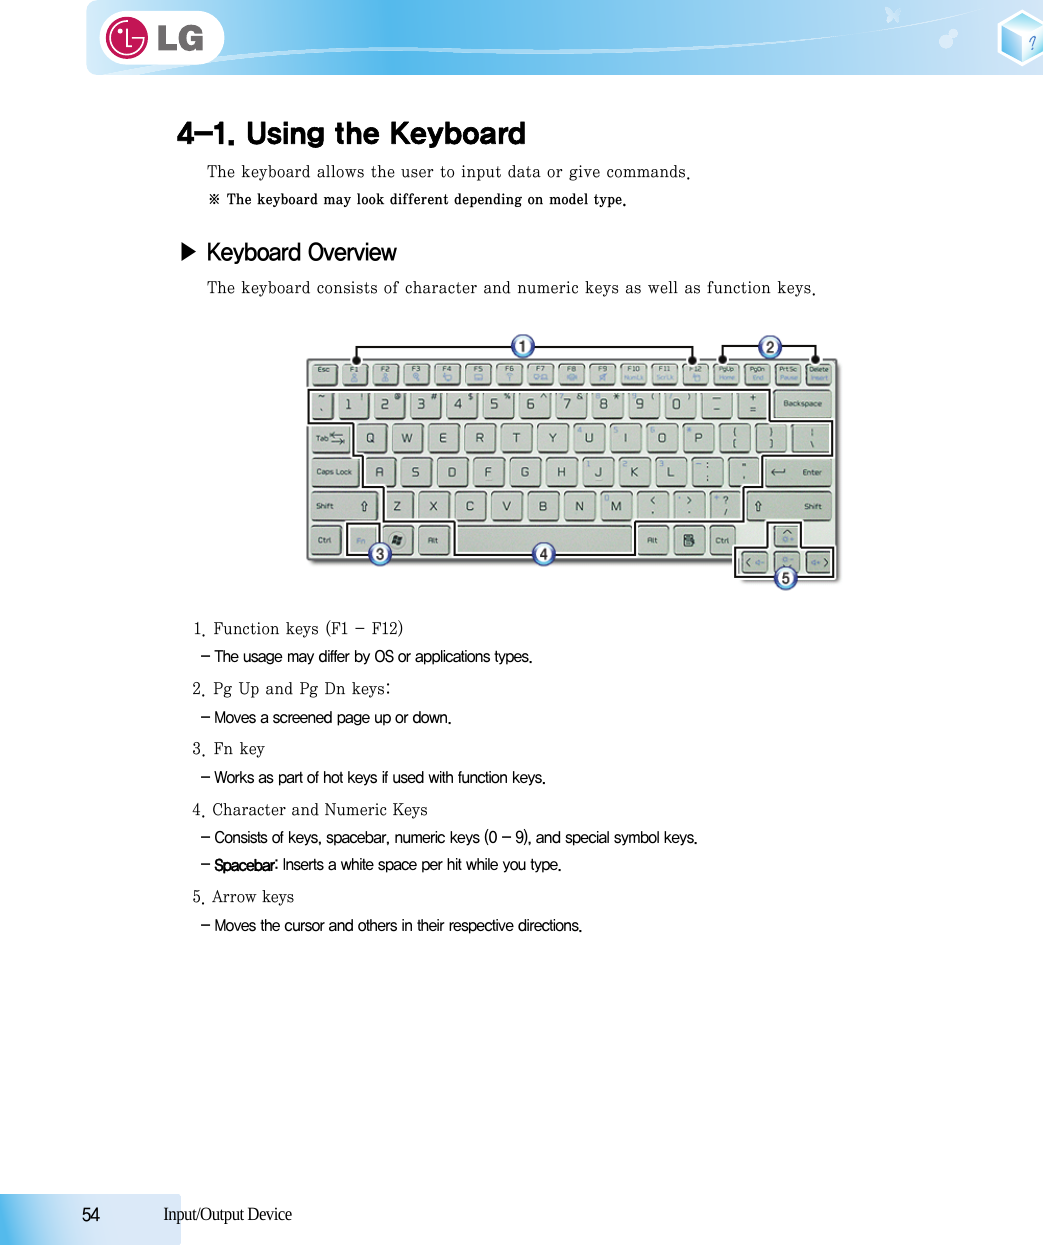 54            Input/Output Device4-1. Using the KeyboardThe keyboard allows the user to input data or give commands.※ The keyboard may look different depending on model type.▶ Keyboard OverviewThe keyboard consists of character and numeric keys as well as function keys.1. Function keys (F1 - F12)- The usage may differ by OS or applications types.2. Pg Up and Pg Dn keys:- Moves a screened page up or down.3. Fn key- Works as part of hot keys if used with function keys.4. Character and Numeric Keys - Consists of keys, spacebar, numeric keys (0 - 9), and special symbol keys.- Spacebar: Inserts a white space per hit while you type.5. Arrow keys - Moves the cursor and others in their respective directions.